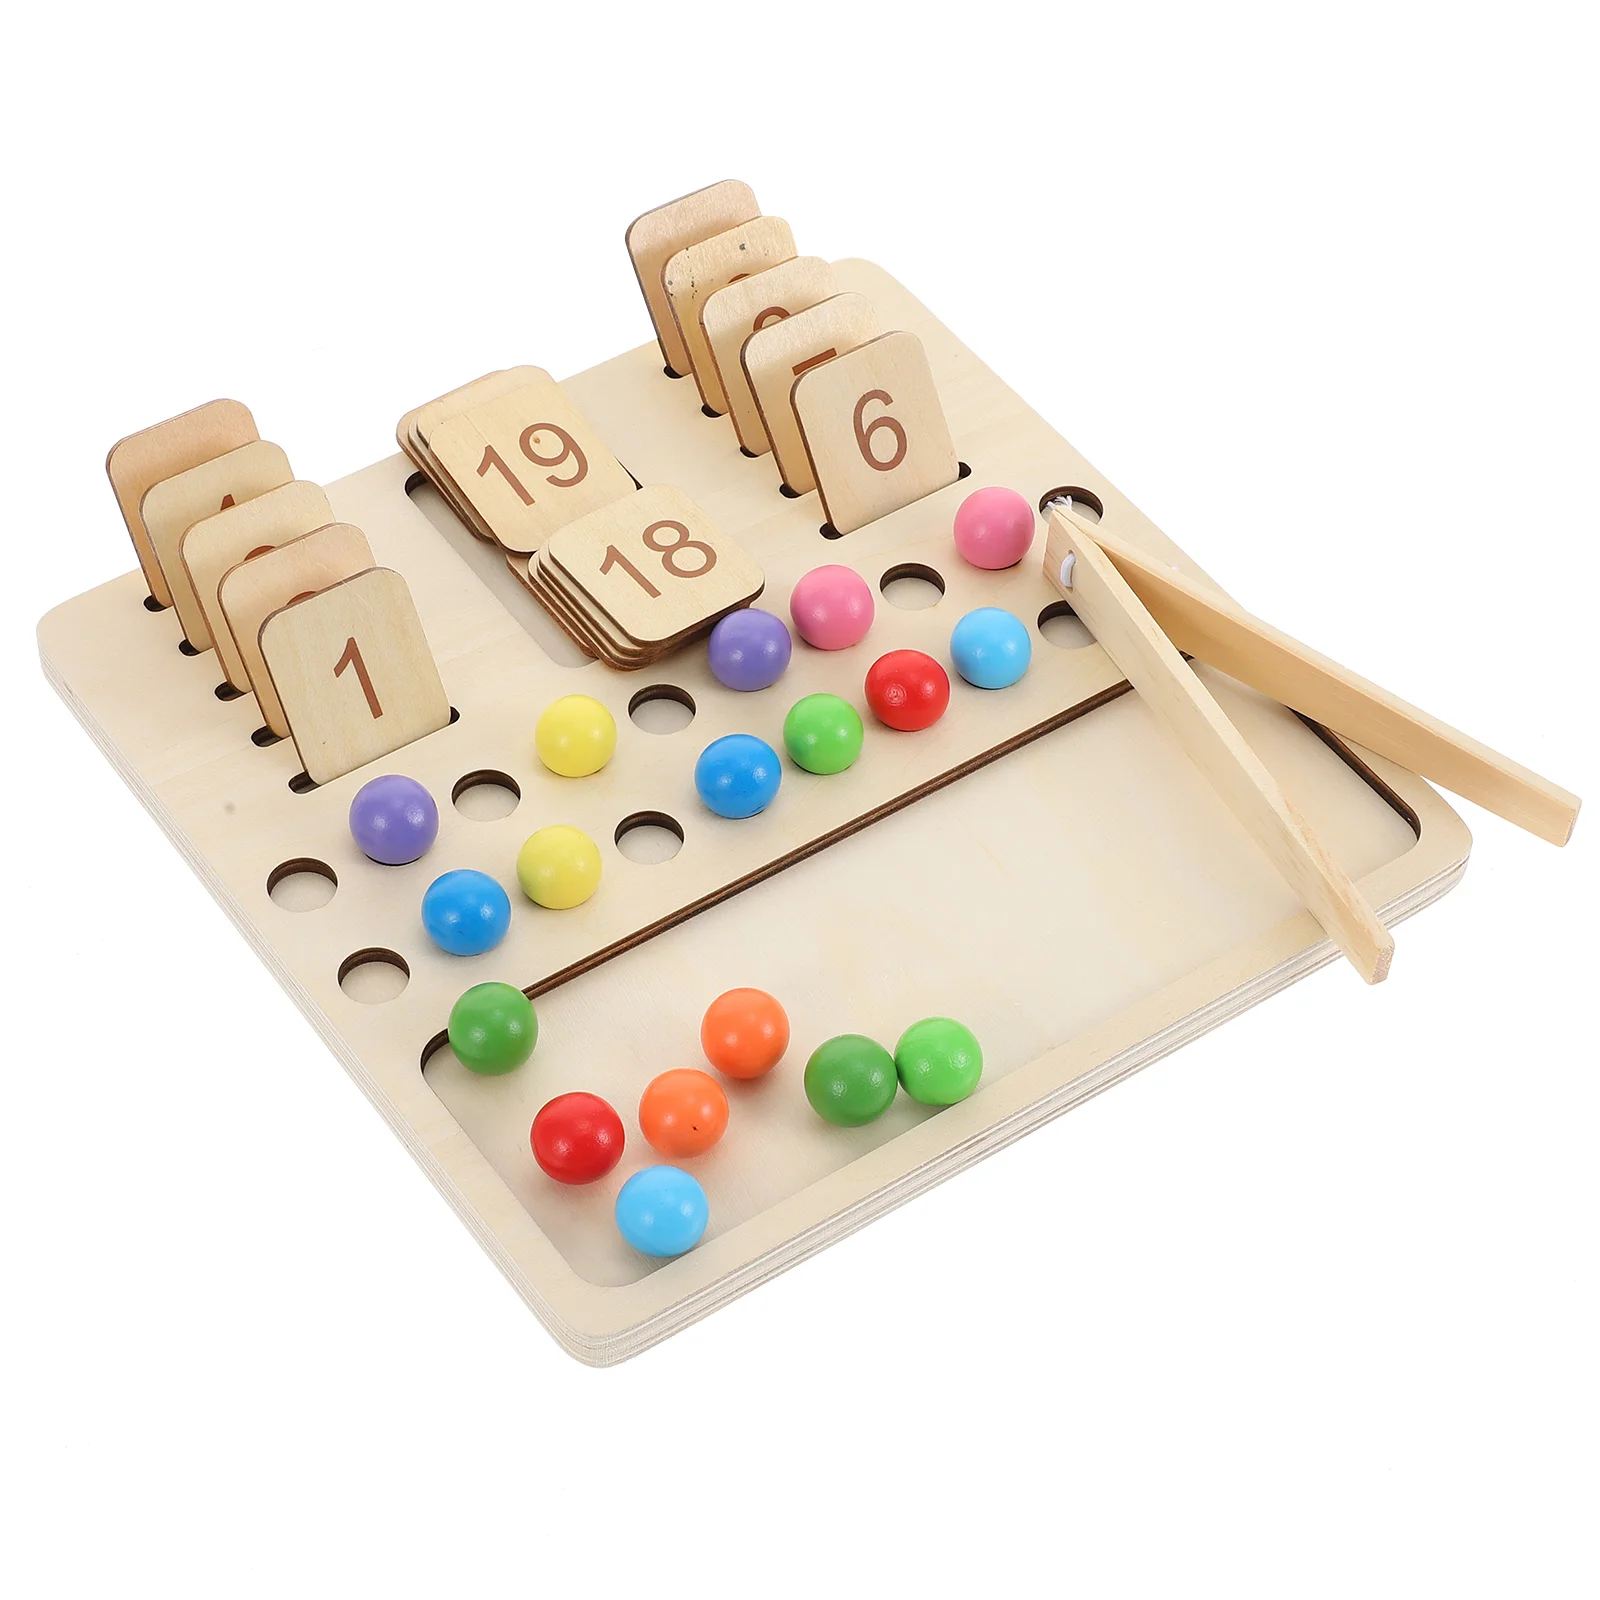 Digital Cognitive Board Toys Wooden Educational Teaching Supplies Playthings Aids Arithmetic Boards Math Learning montessori teaching aids math toys kindergarten manual diy handmade crafts weave cloth early learning education toys